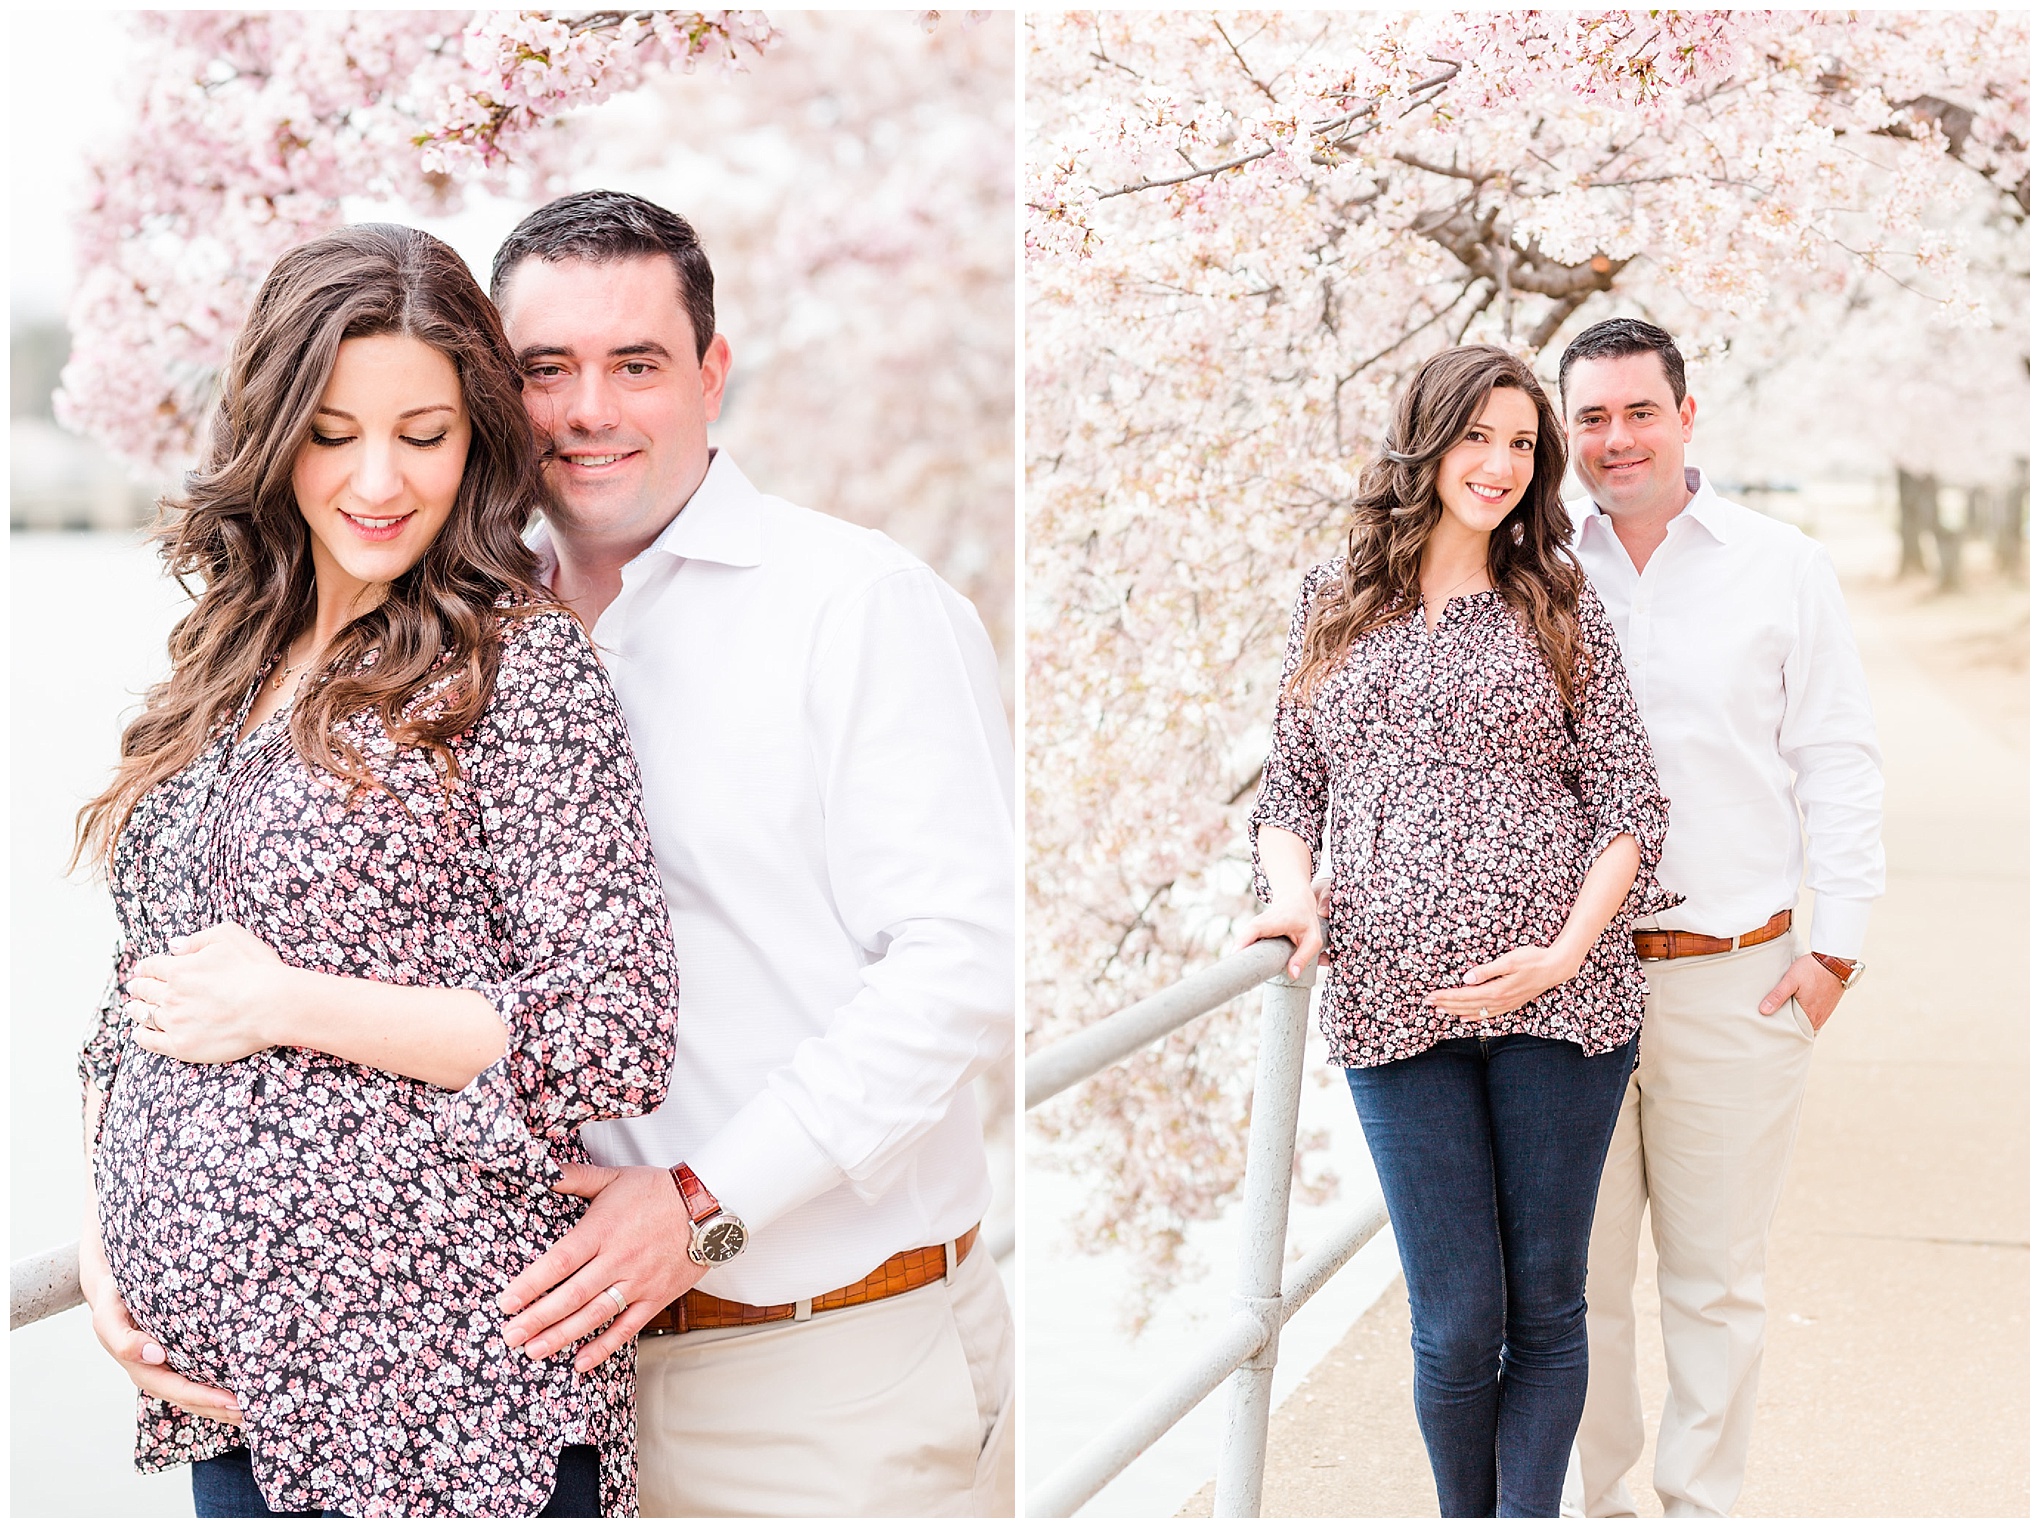 D.C. cherry blossoms maternity session, expectant couple, D.C. couple, maternity photos, maternity portraits, spring maternity photos, cherry blossoms, D.C. cherry blossoms, tidal basin, couple hugging, brunette mom to be, brunette woman, floral print top, dark wash blue jeans, 